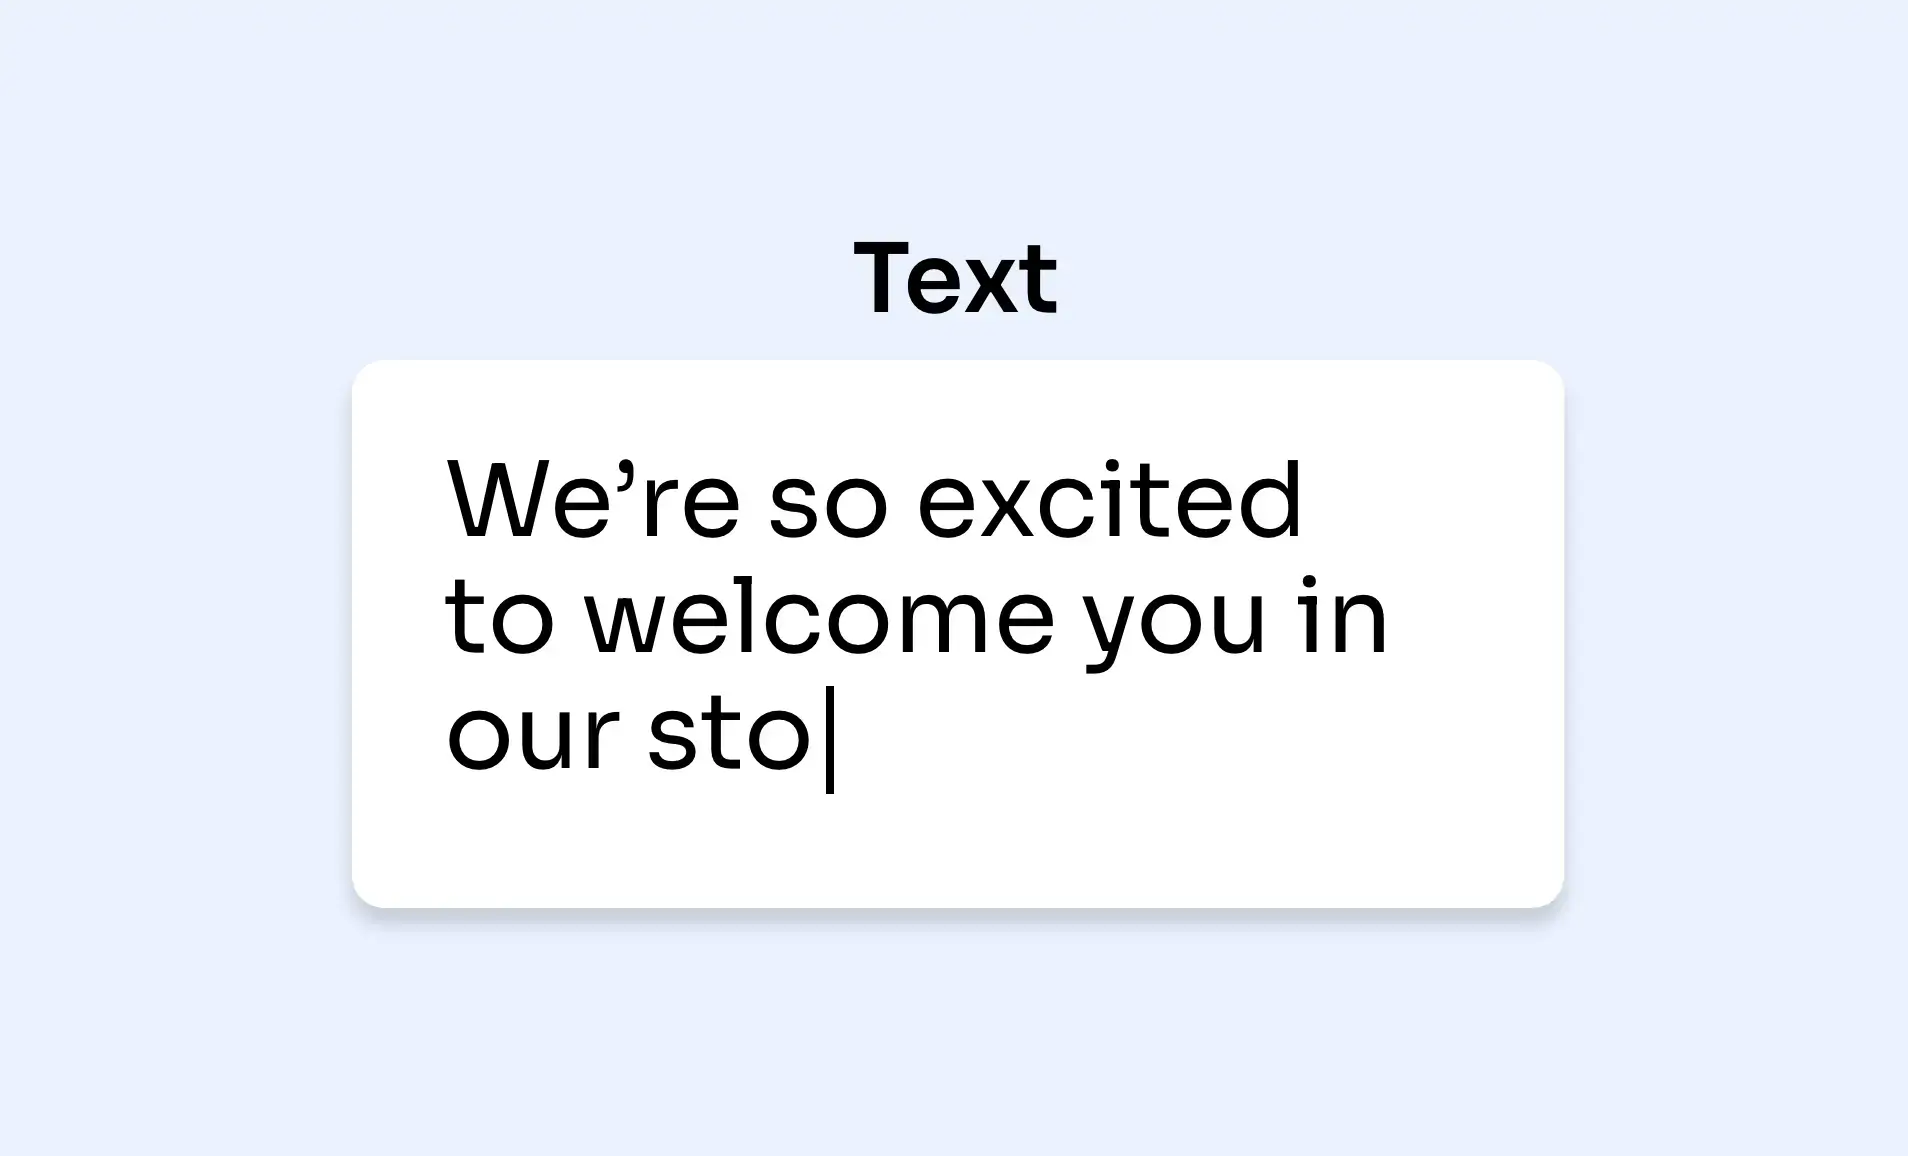 Scroller text app interface with option to insert the text to display on digital signage.